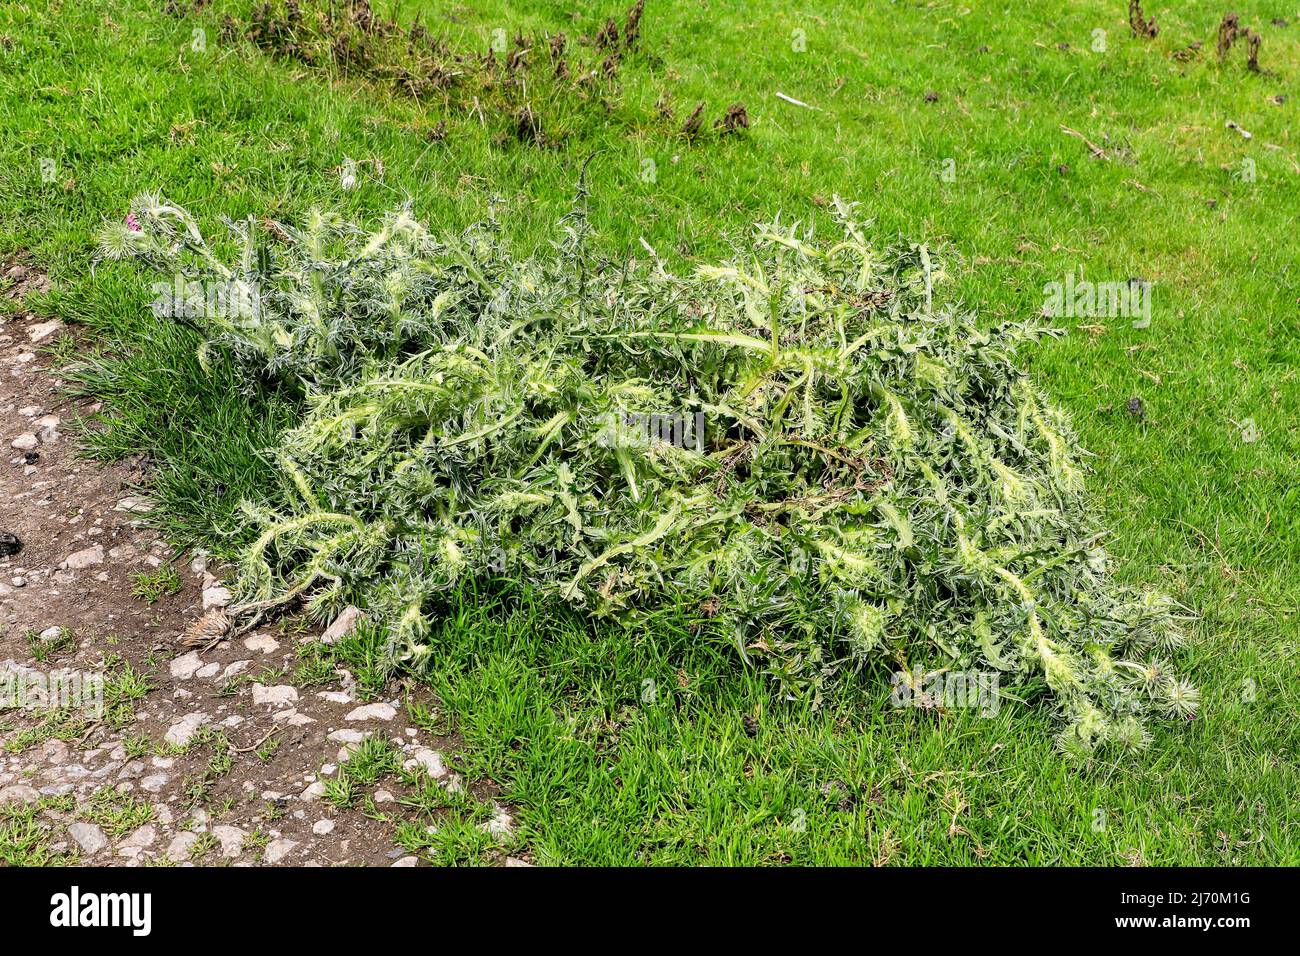 Creeping Thistle or Field Thistle (Cirsium arvense) which is dying after being sprayed with weed killer, Derbyshire, England, UK Stock Photo